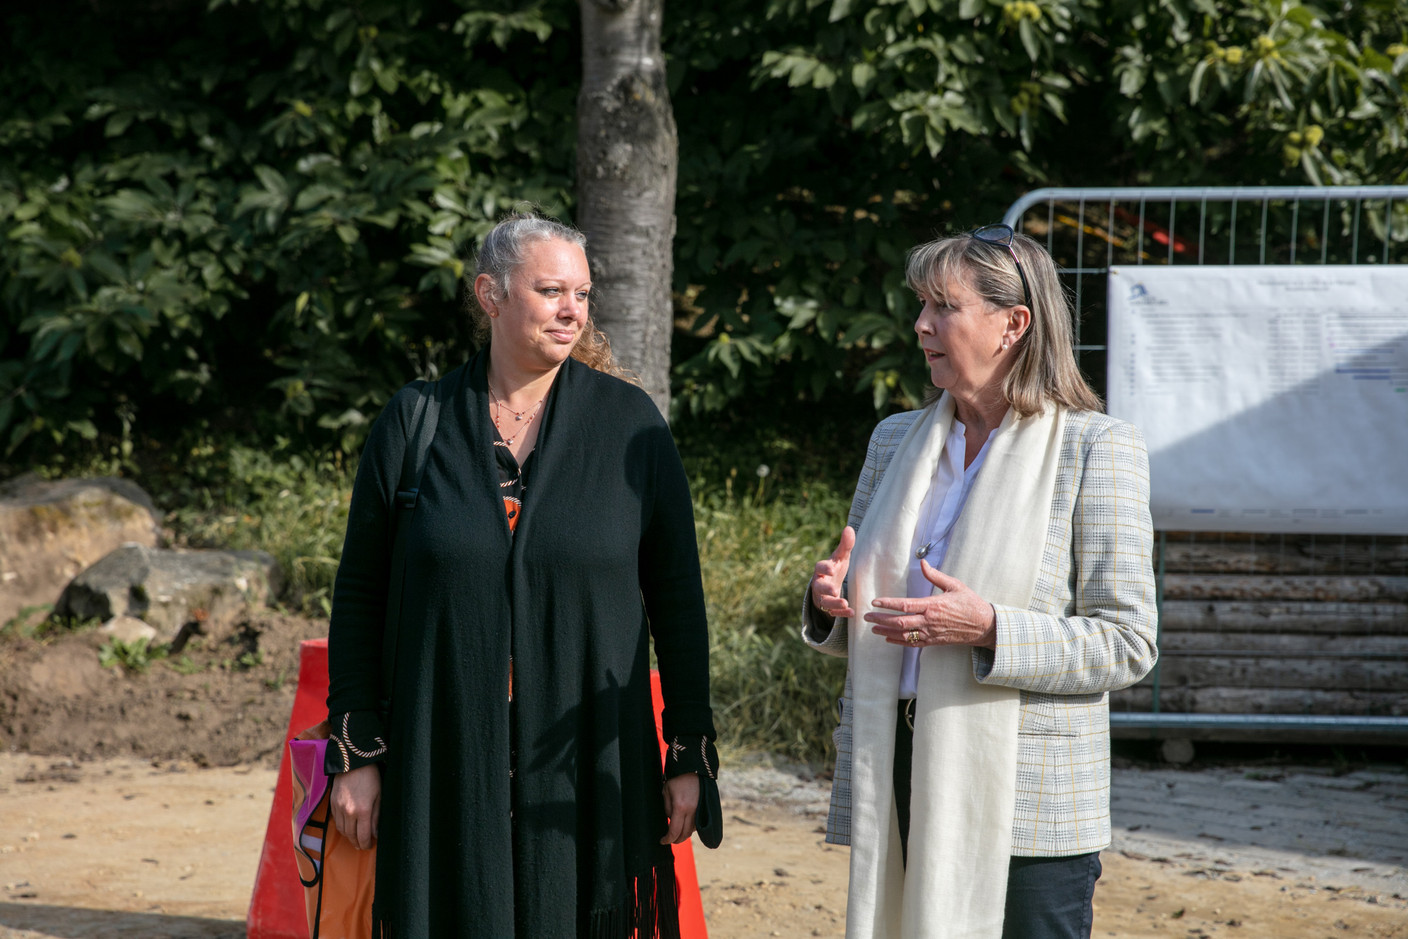 Carole Dieschbourg (déi Gréng), minister for the environment, climate and sustainable development, together with Lydie Polfer (DP) on a visit of the construction site. Photo: Romain Gamba / Maison Moderne